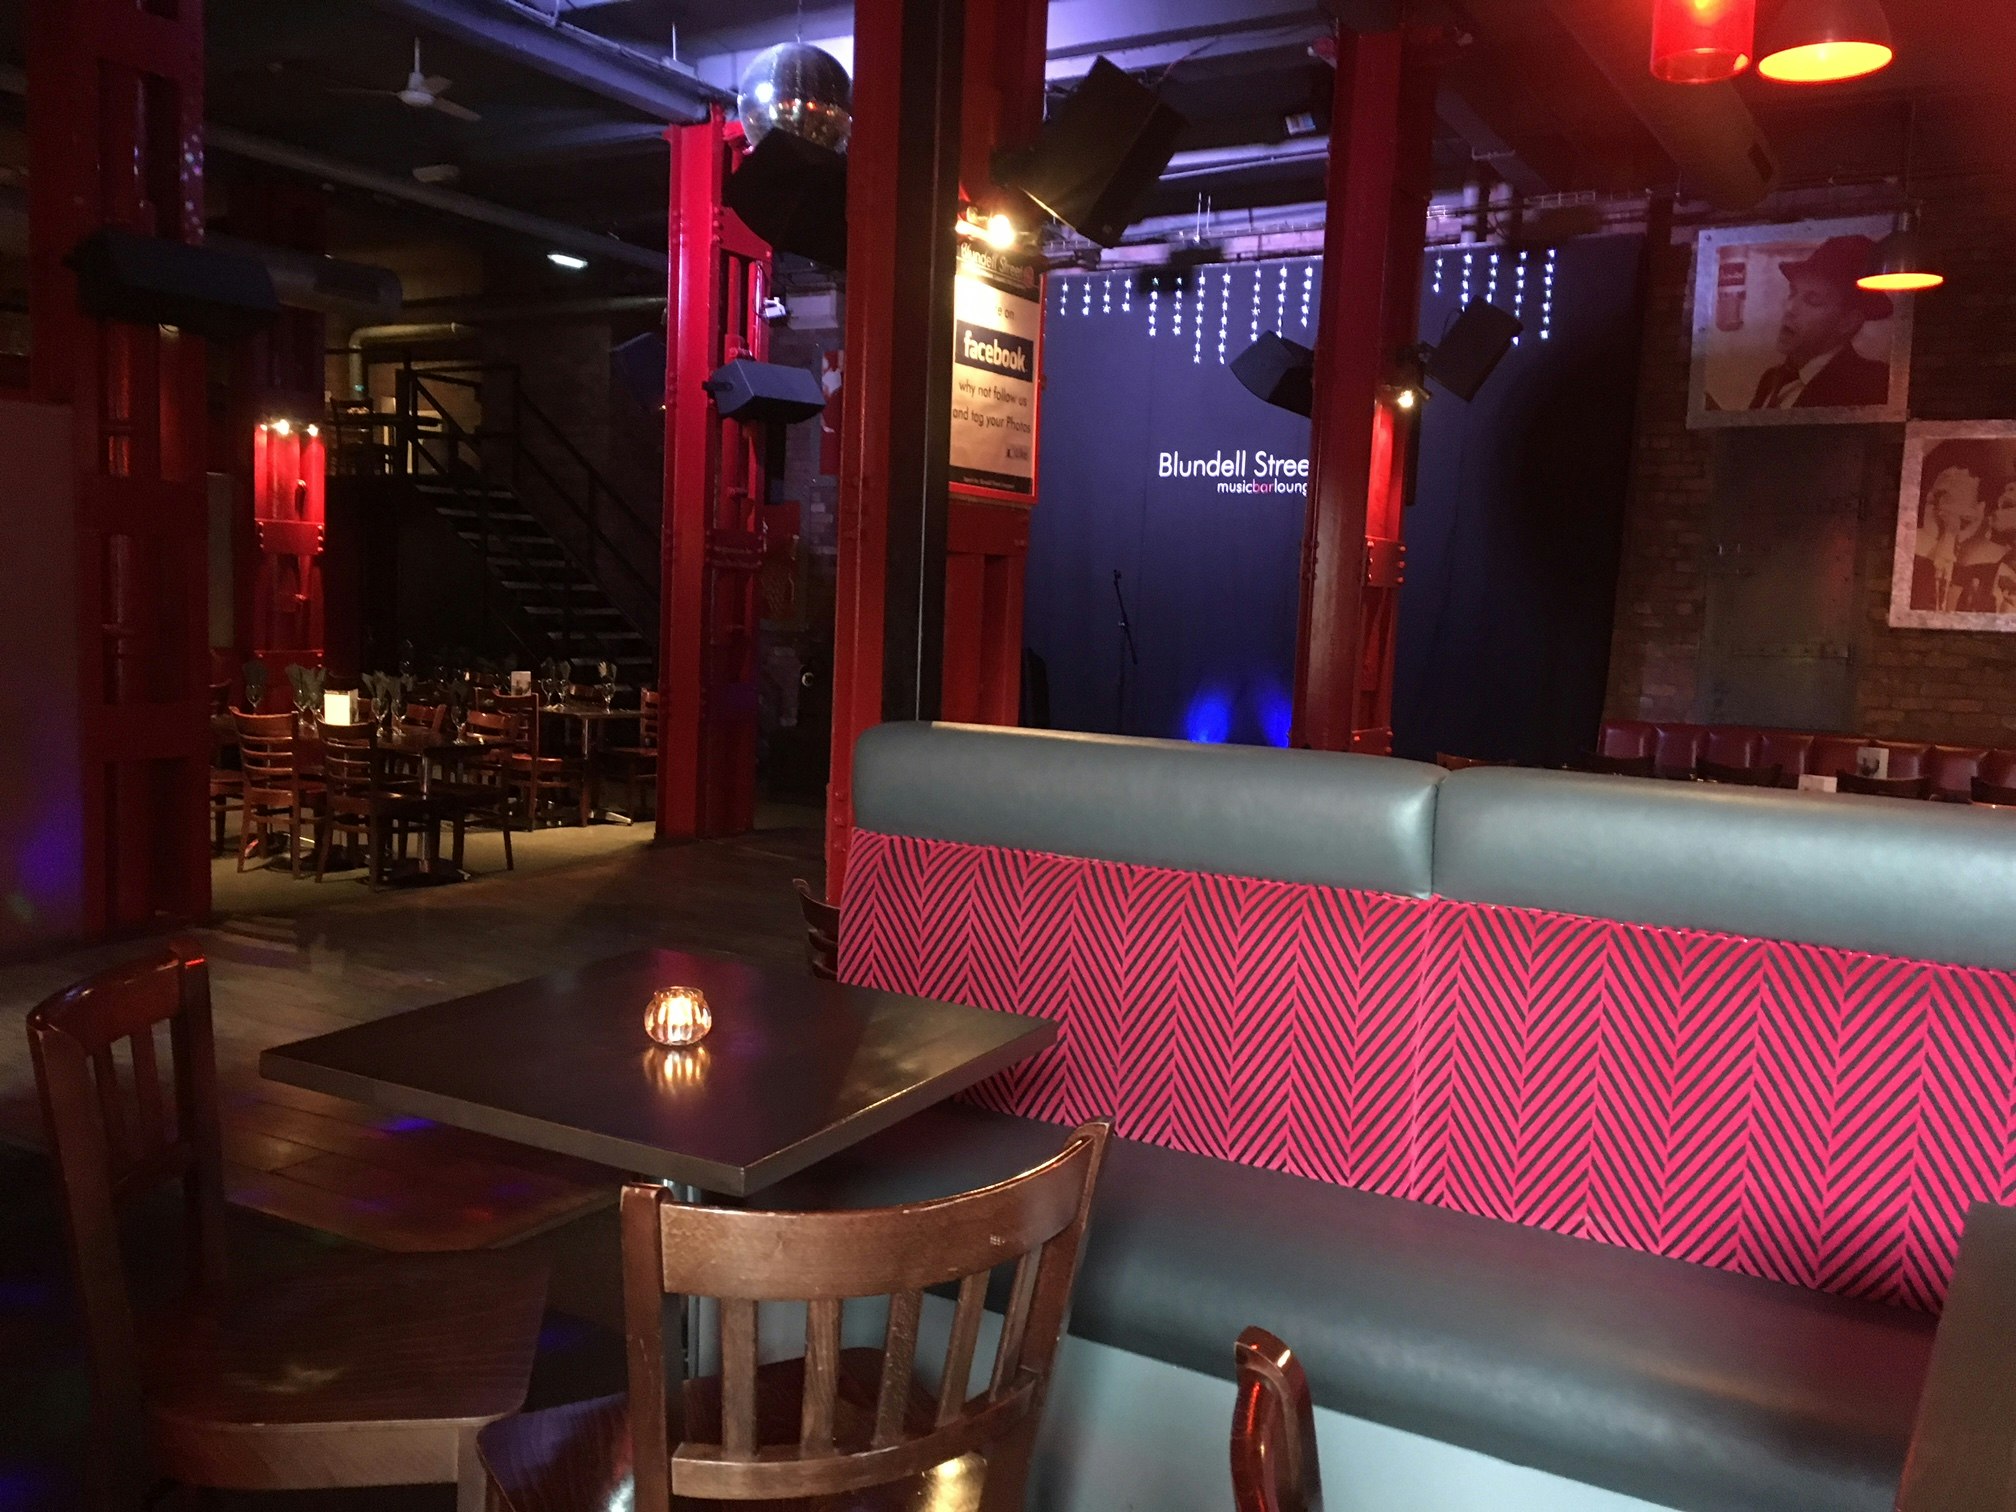 Office Party Venues - Blundell Street Restaurant and Bar